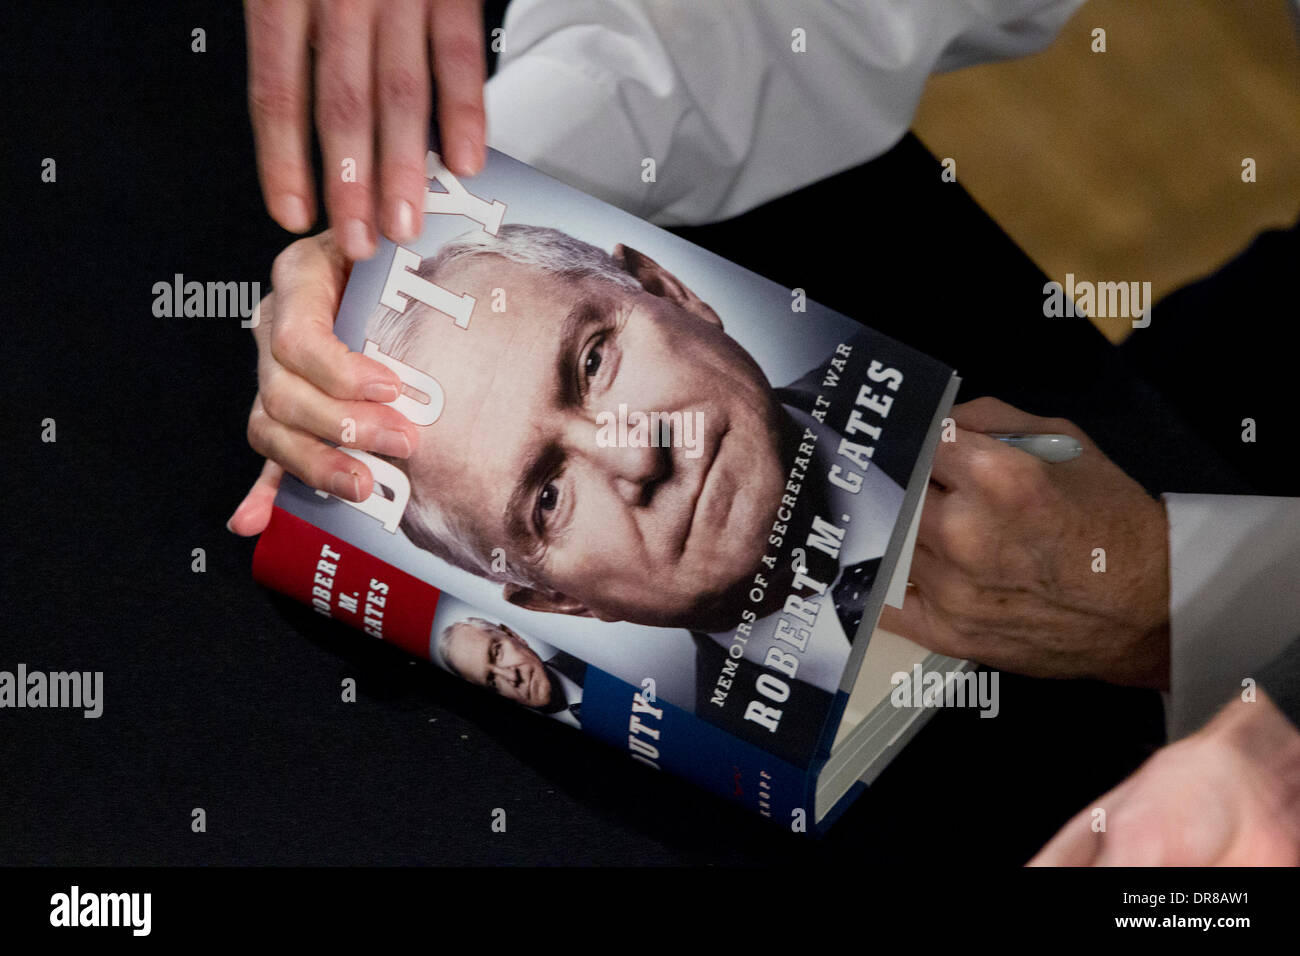 Former secretary of defense Robert Gates signs book after talking about 'Duty,' which criticizes Bush and Obama administrations Stock Photo